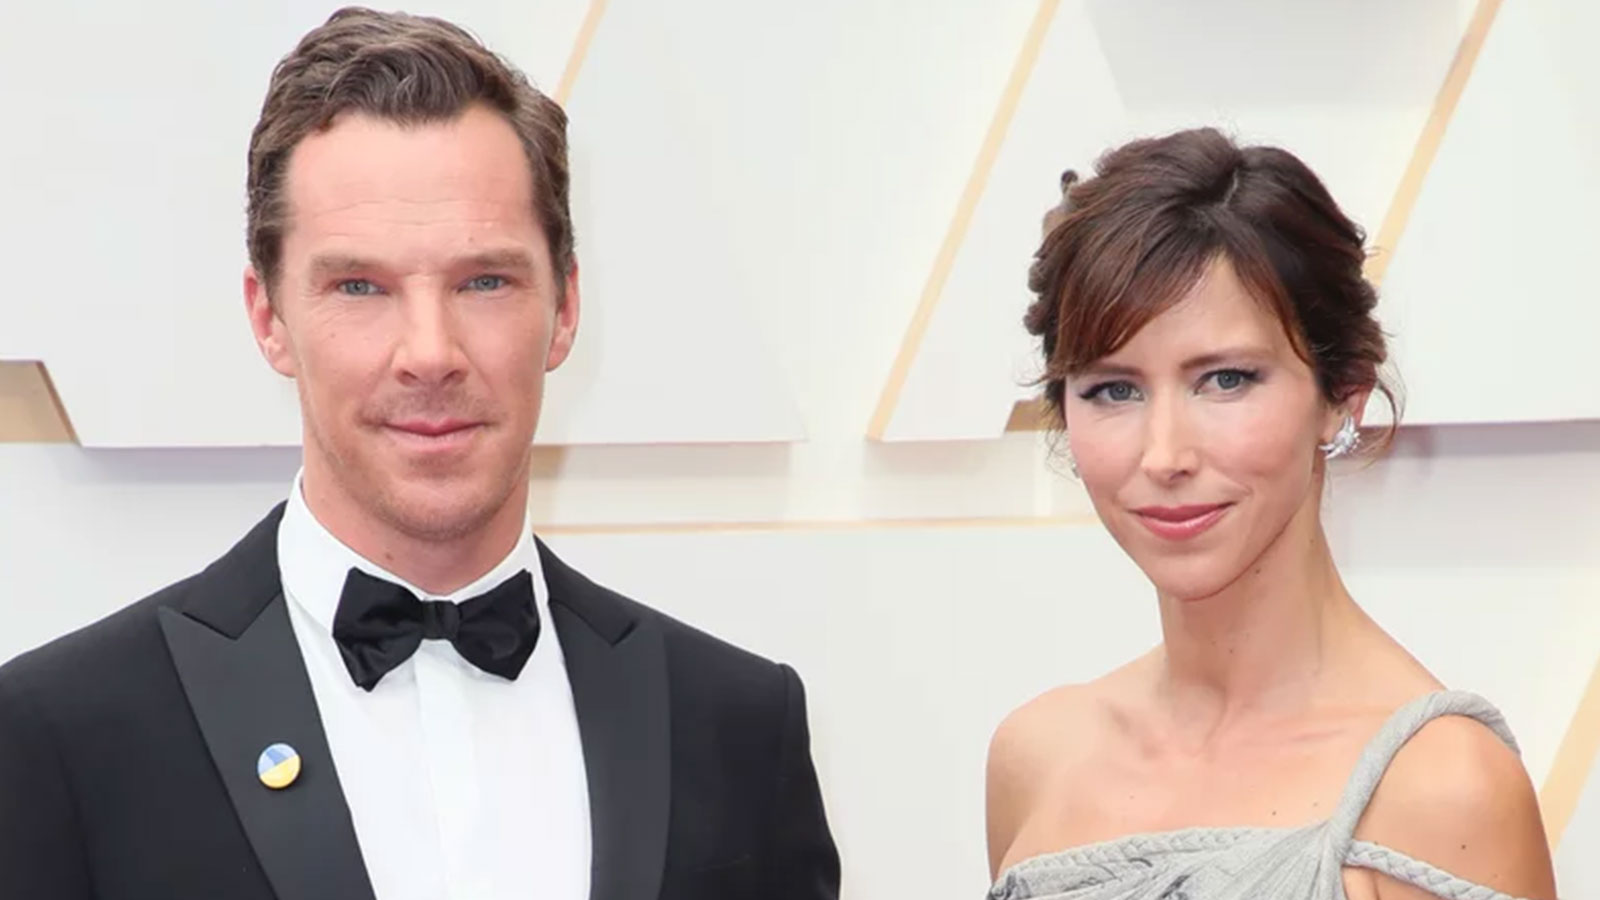 Benedict Cumberbatch with his wife, Sophie Hunter, attend the 94th Annual Academy Awards.